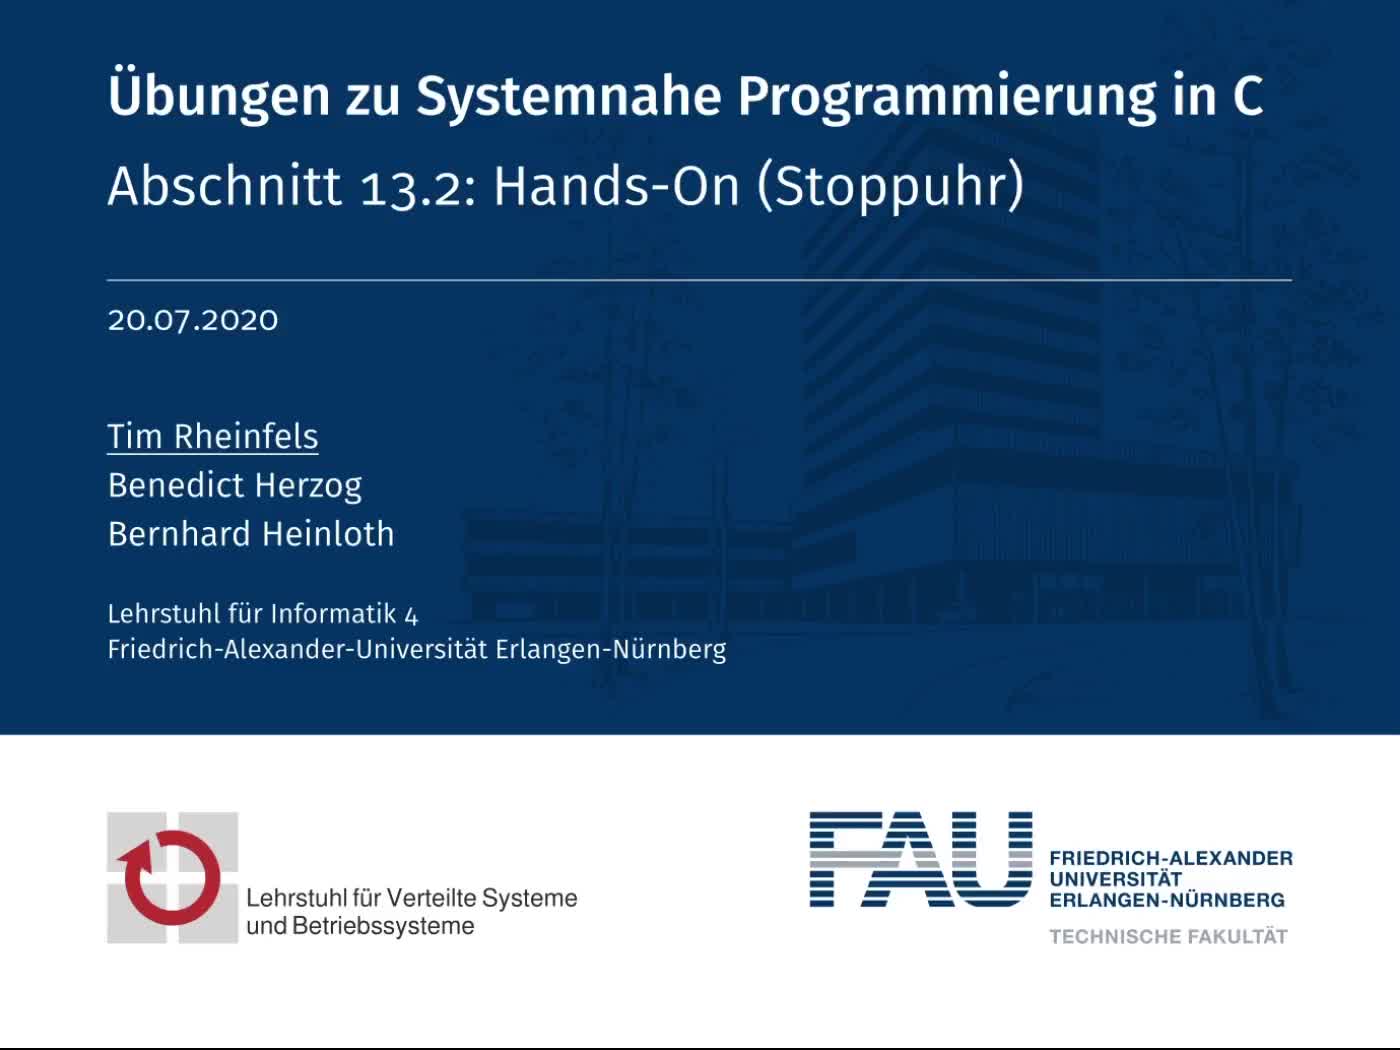 13.2: Hands-On (Stoppuhr) preview image